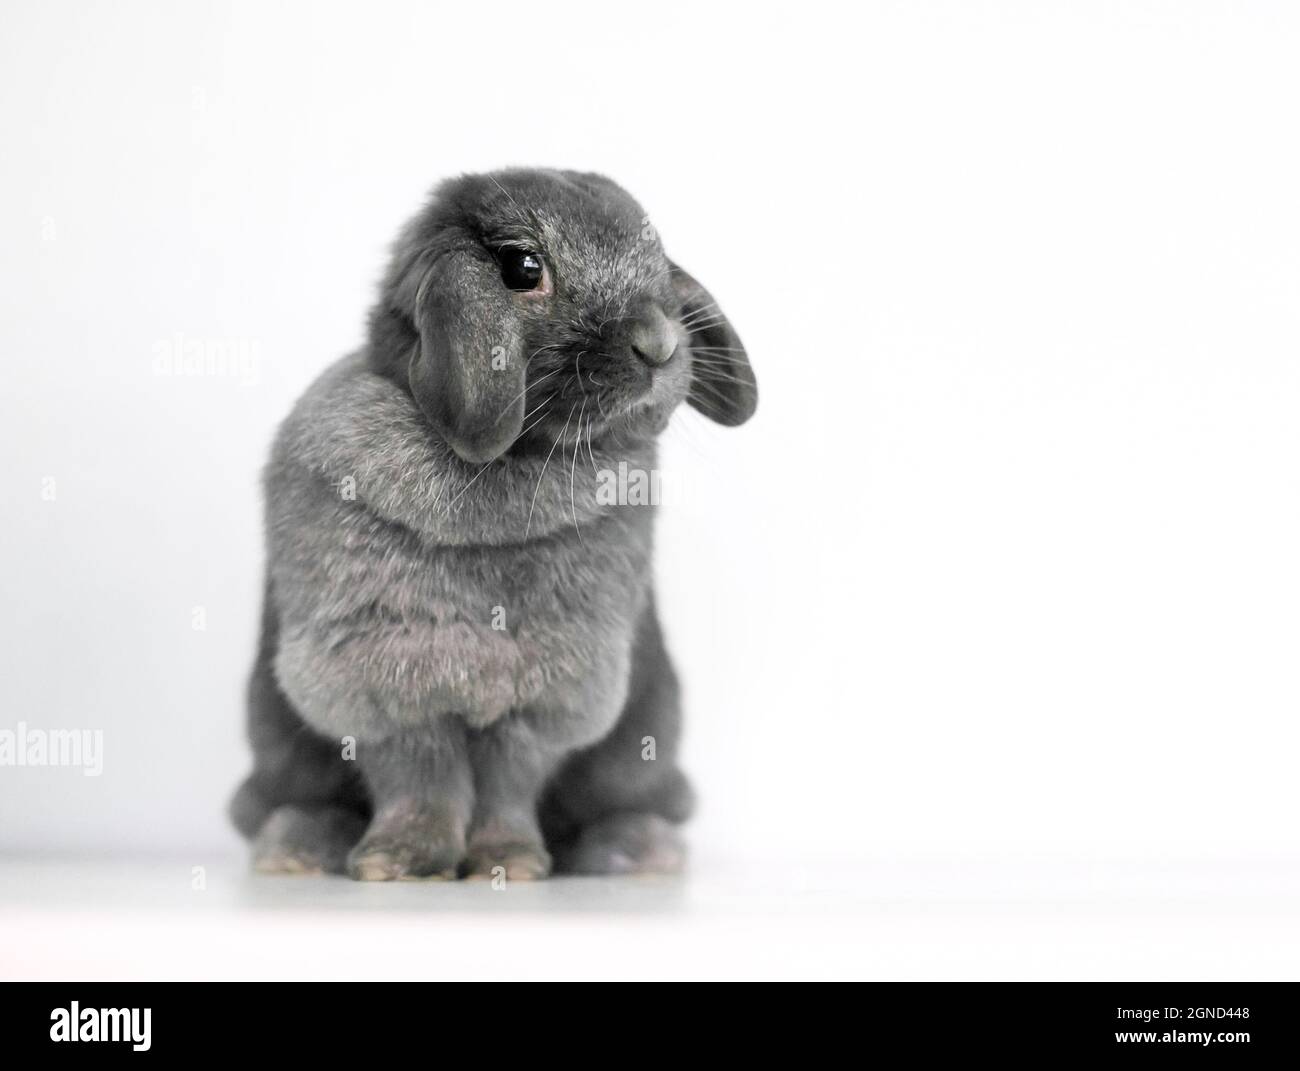 A cute gray Lop rabbit sitting on a white background Stock Photo